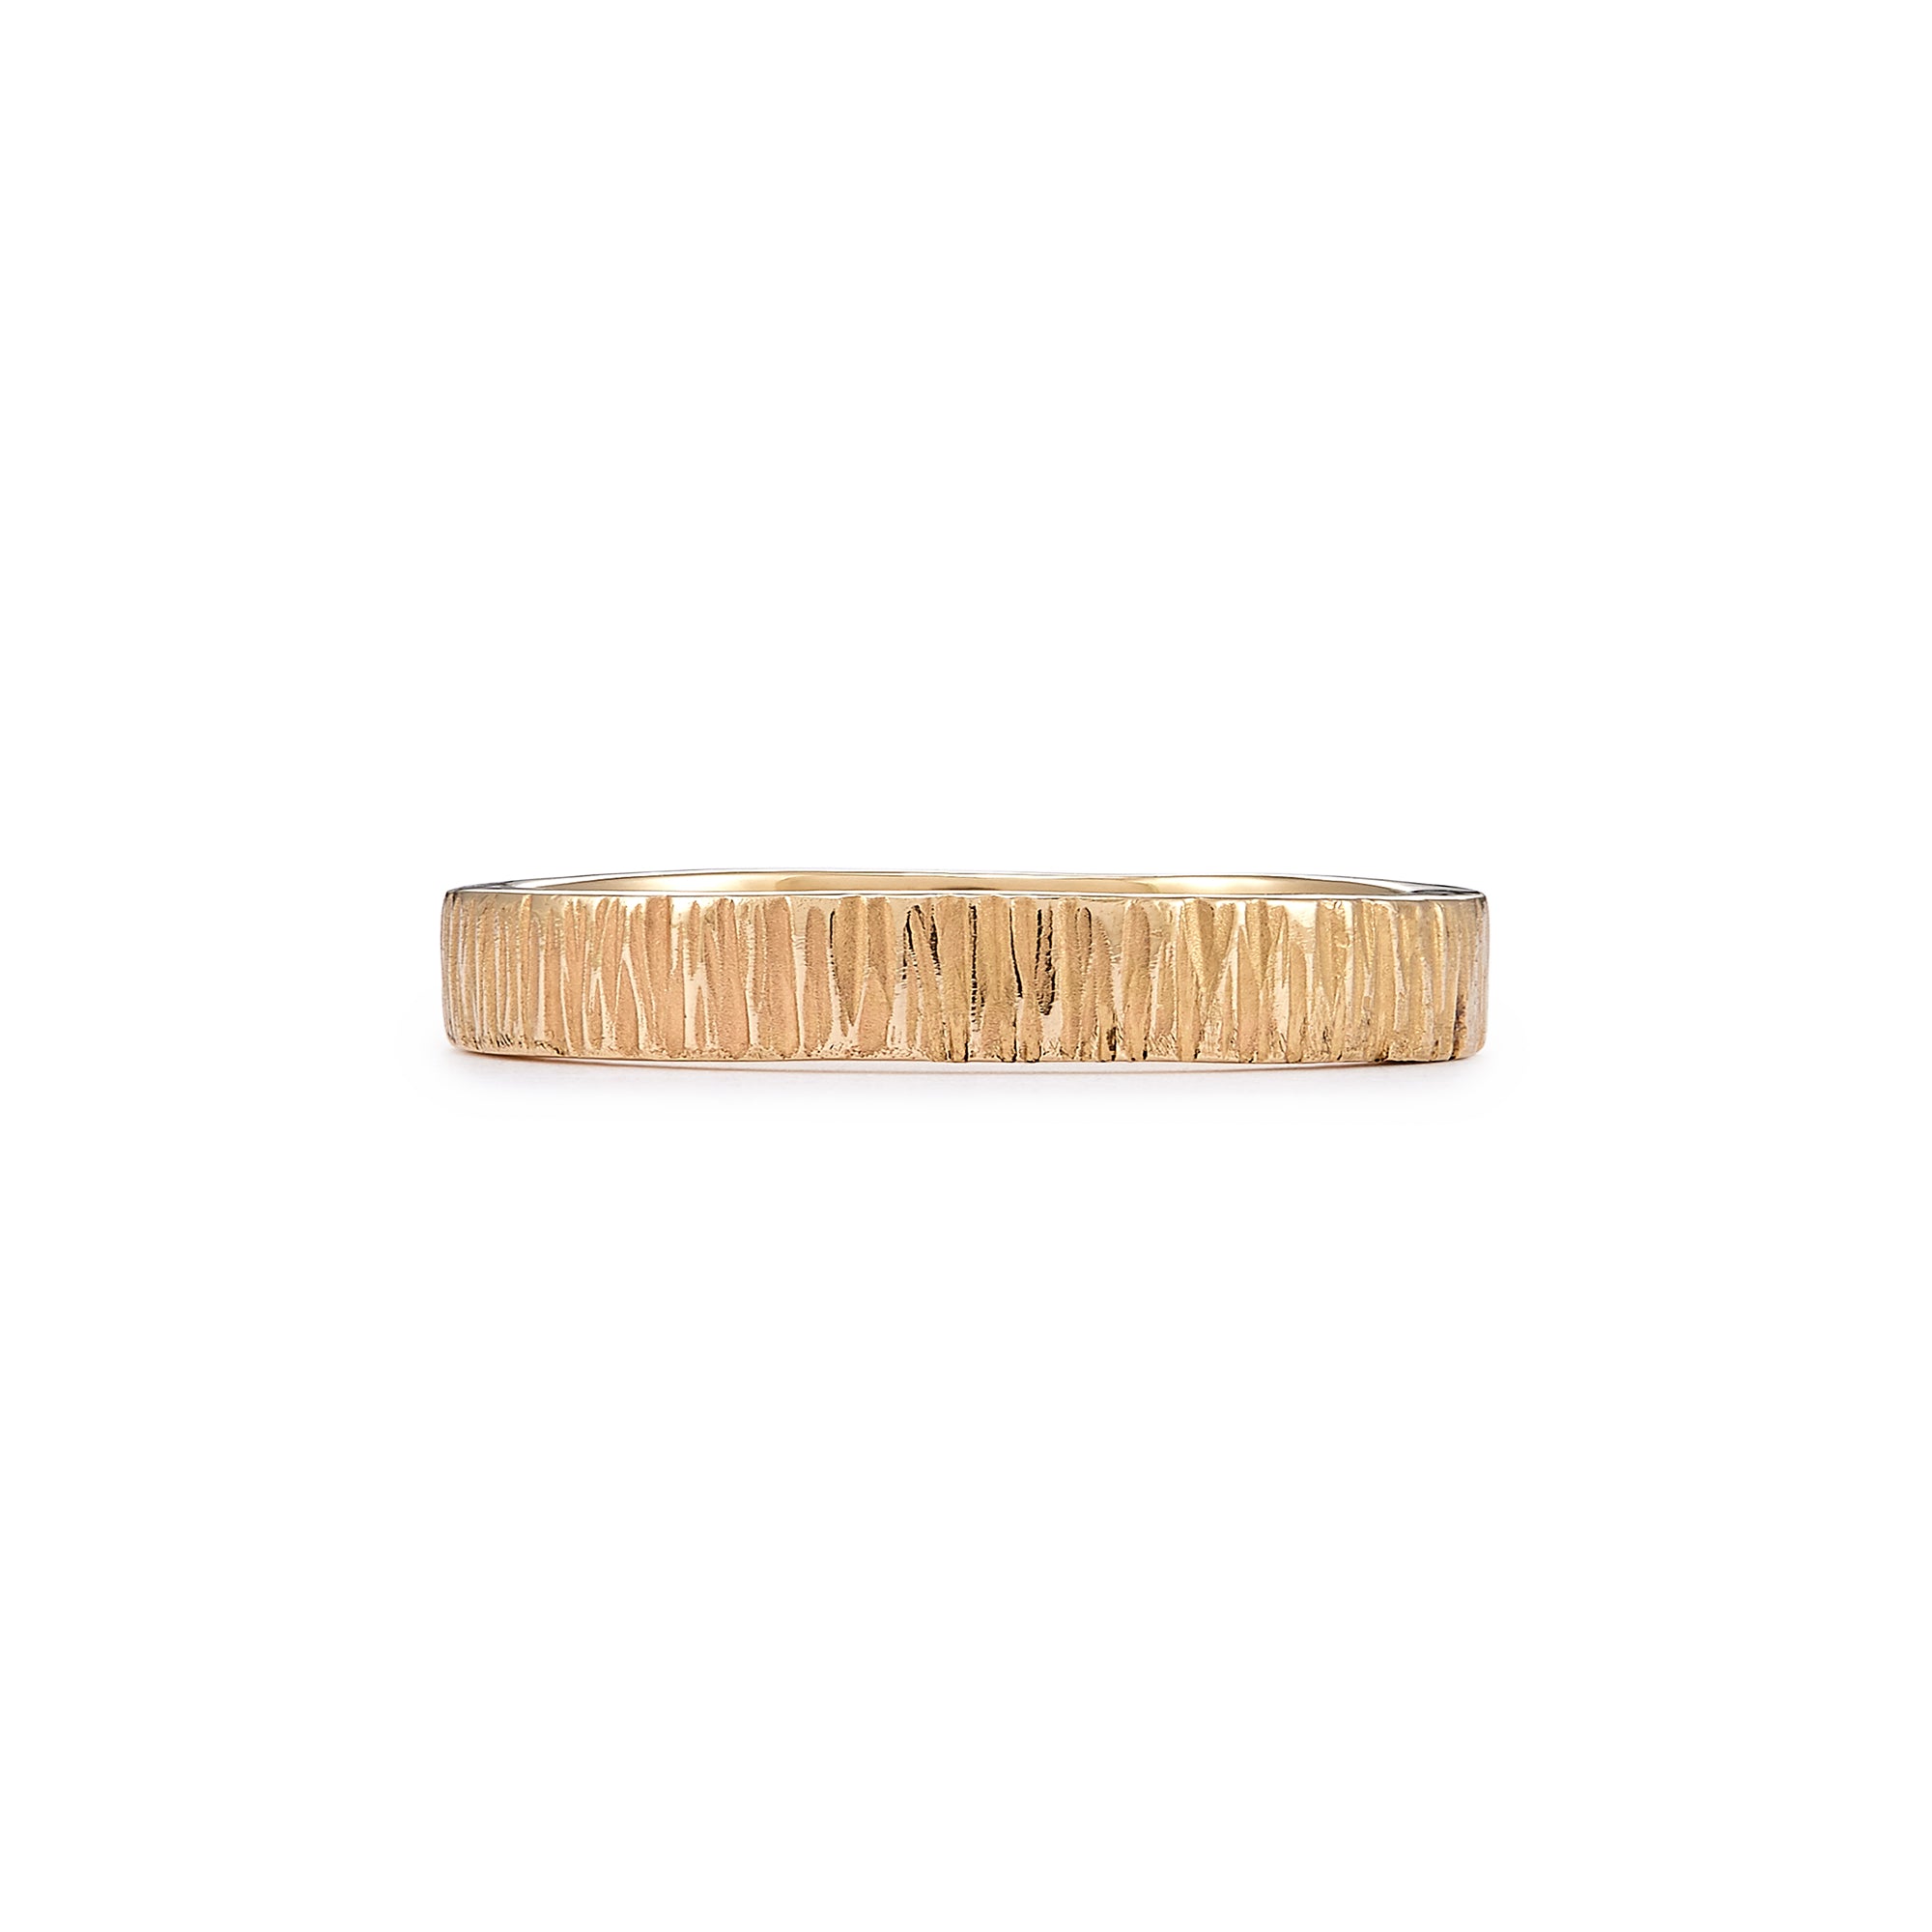 The unisex 3.5mm Lines Band in 14k gold is a classic ring that features a simple vertical lines texture